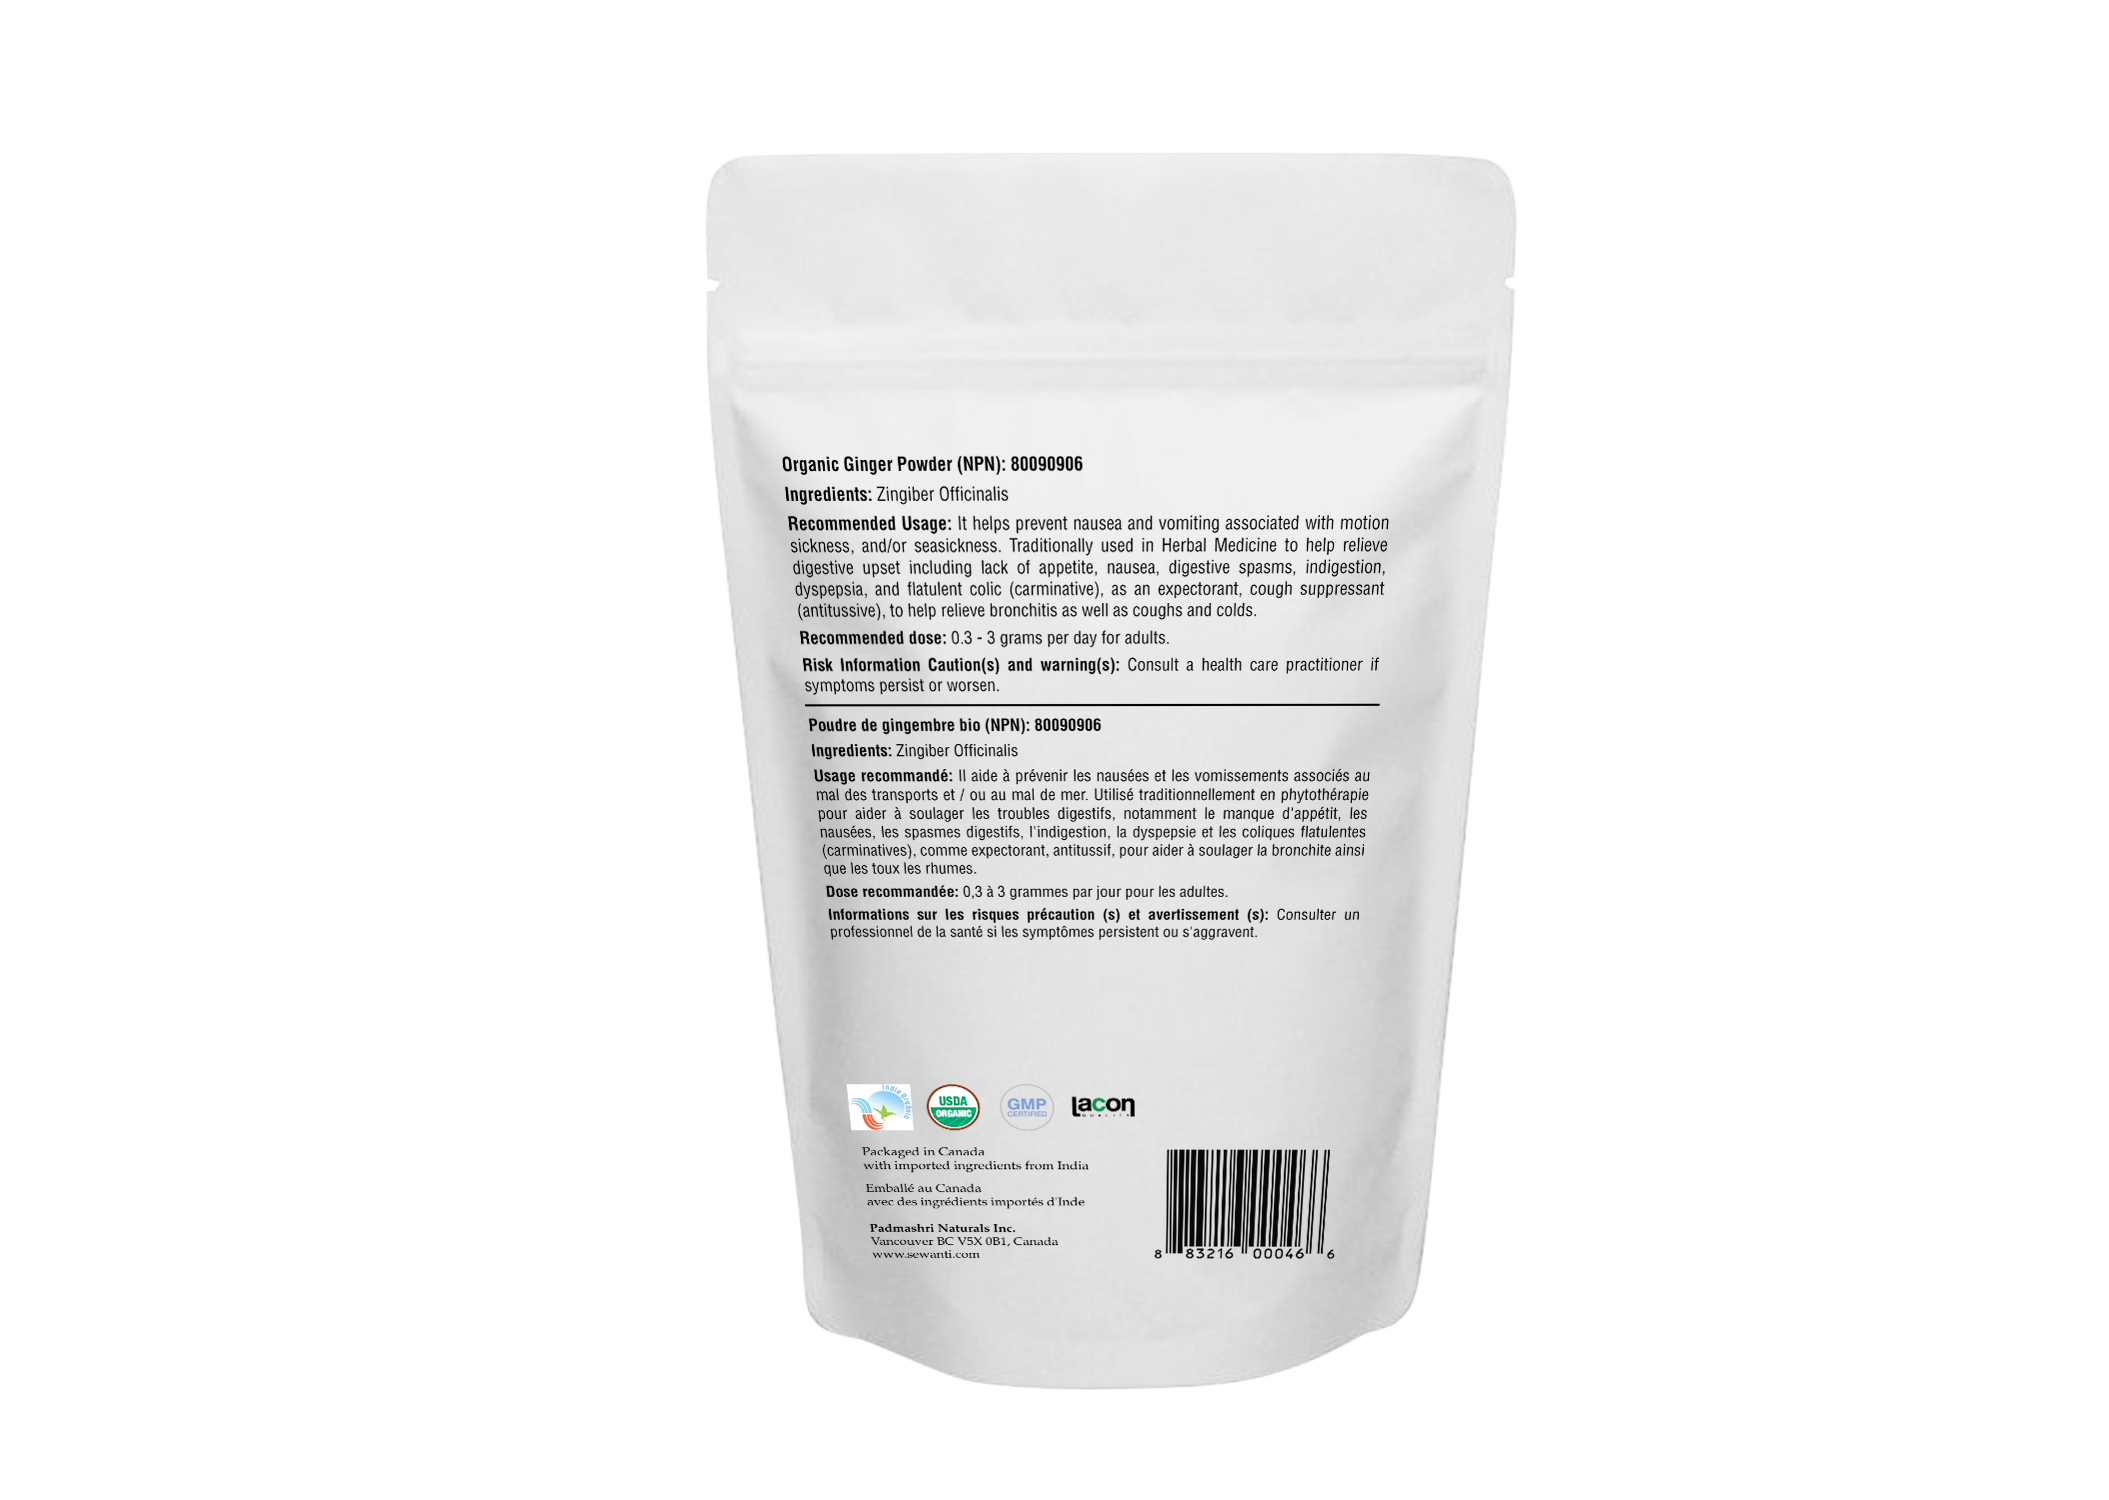 Organic Ginger Powder - Zingiber Officinalis - Ginger is traditionally used in herbal medicines to help relieve digestive upset including lack of appetite, nausea, digestive spasms, indigestion, dyspepsia, and flatulent colic (carminative), as an expectorant and cough suppressant (antitussive) to help relieve bronchitis as well as coughs and colds.